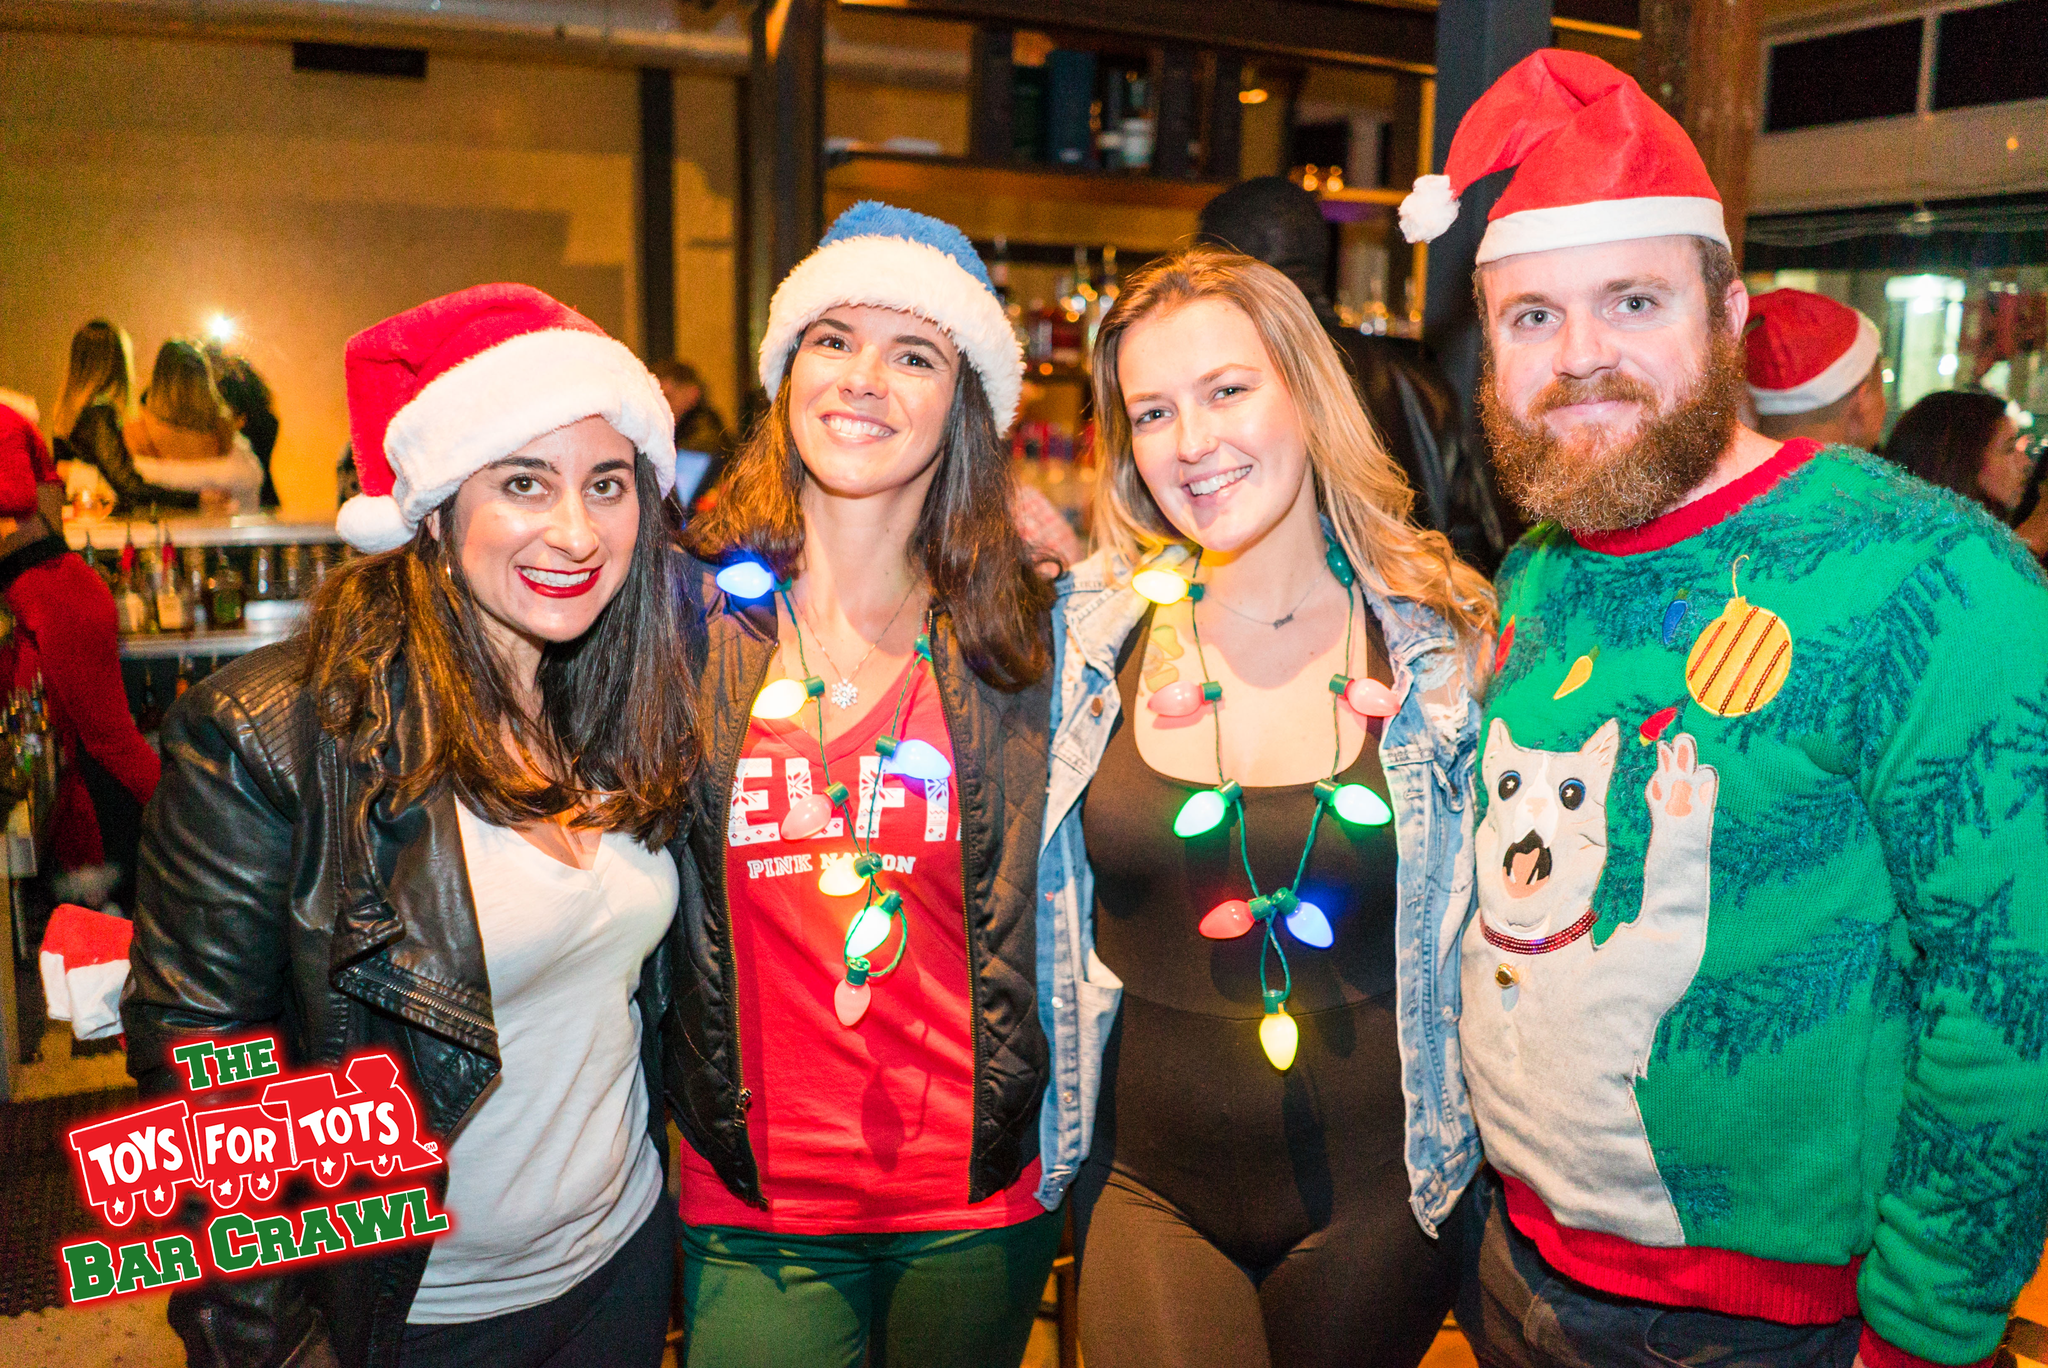 The Toys For Tots Bar Crawl